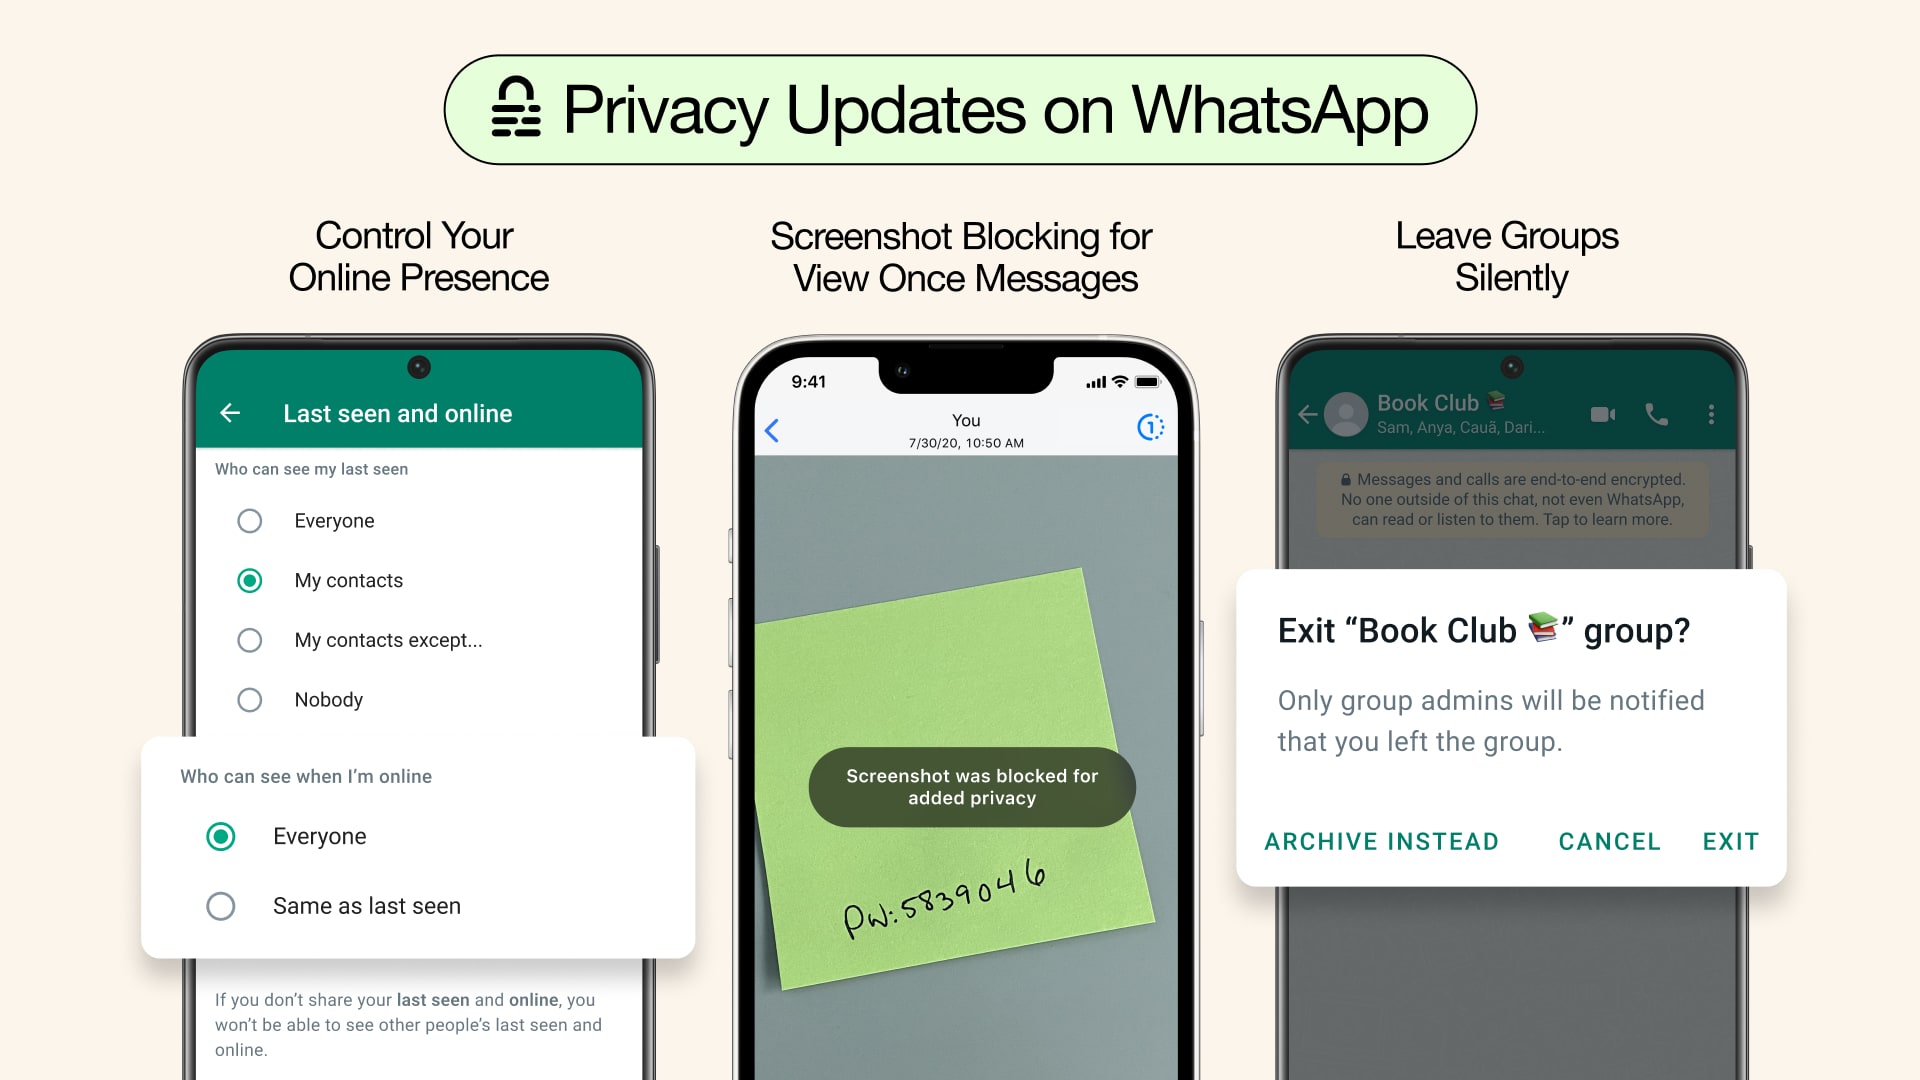 WhatsApp marketing image showcasing new privacy features: Online presence, view-once screenshot blocking and leaving groups without notifying everyone 